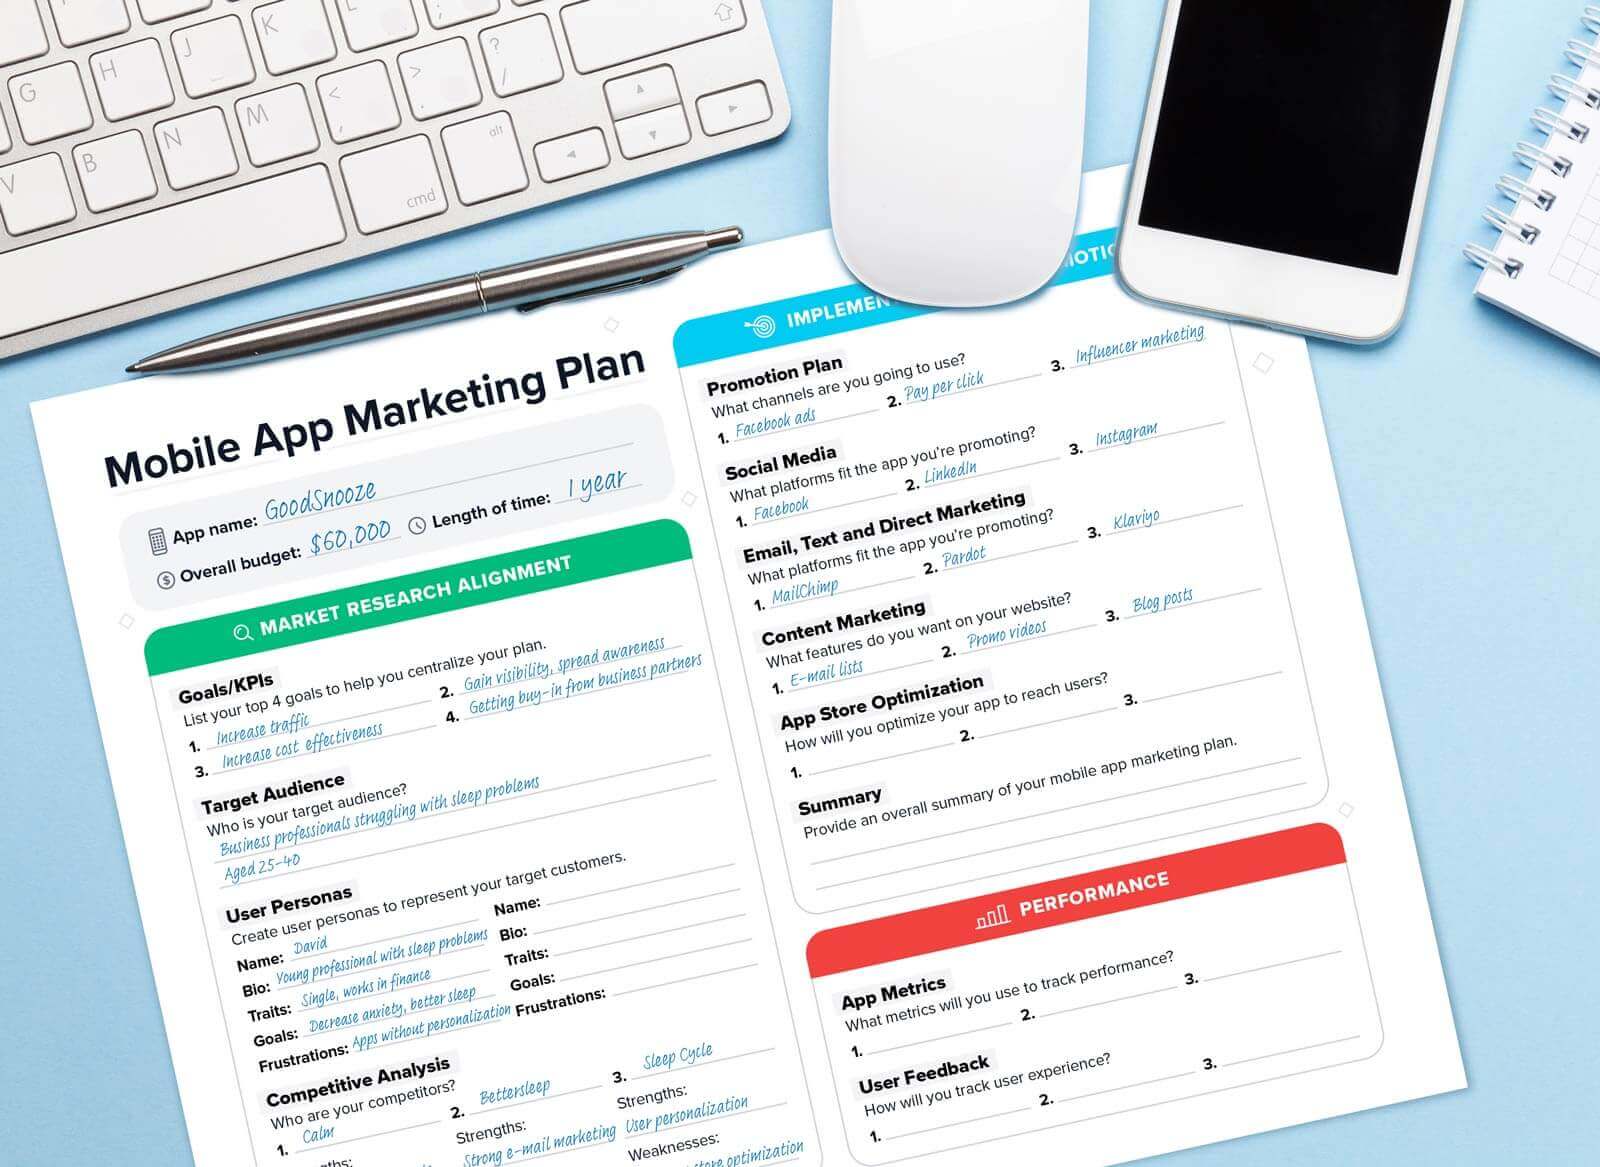 Mobile App Marketing Template Free and 10 Planning Tips CleverTap